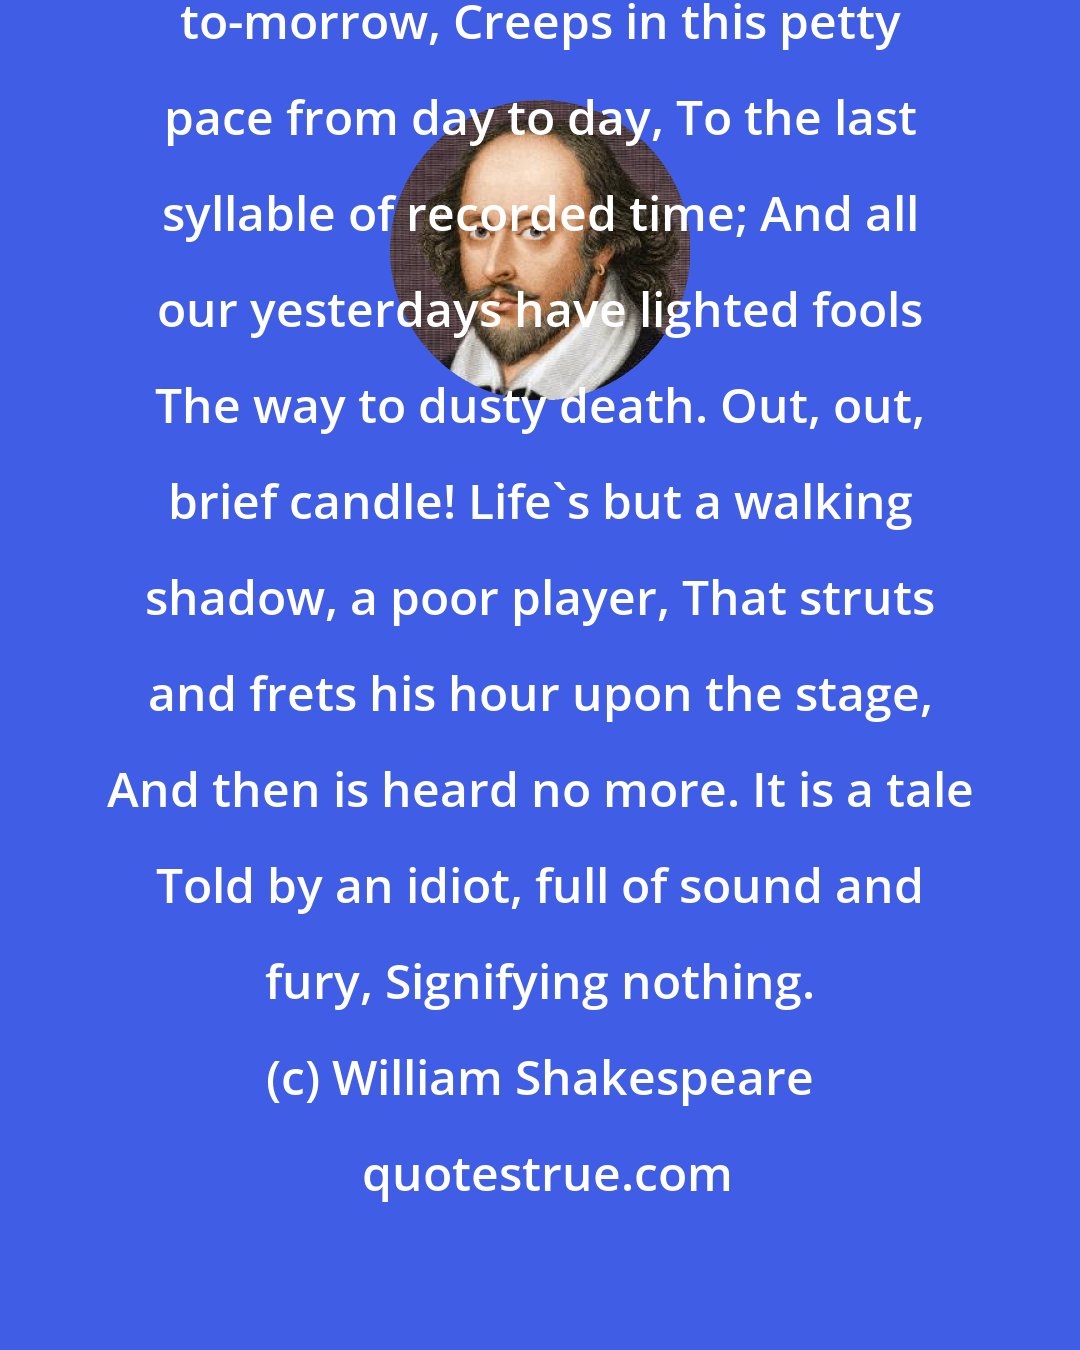 William Shakespeare: To-morrow, and to-morrow, and to-morrow, Creeps in this petty pace from day to day, To the last syllable of recorded time; And all our yesterdays have lighted fools The way to dusty death. Out, out, brief candle! Life's but a walking shadow, a poor player, That struts and frets his hour upon the stage, And then is heard no more. It is a tale Told by an idiot, full of sound and fury, Signifying nothing.